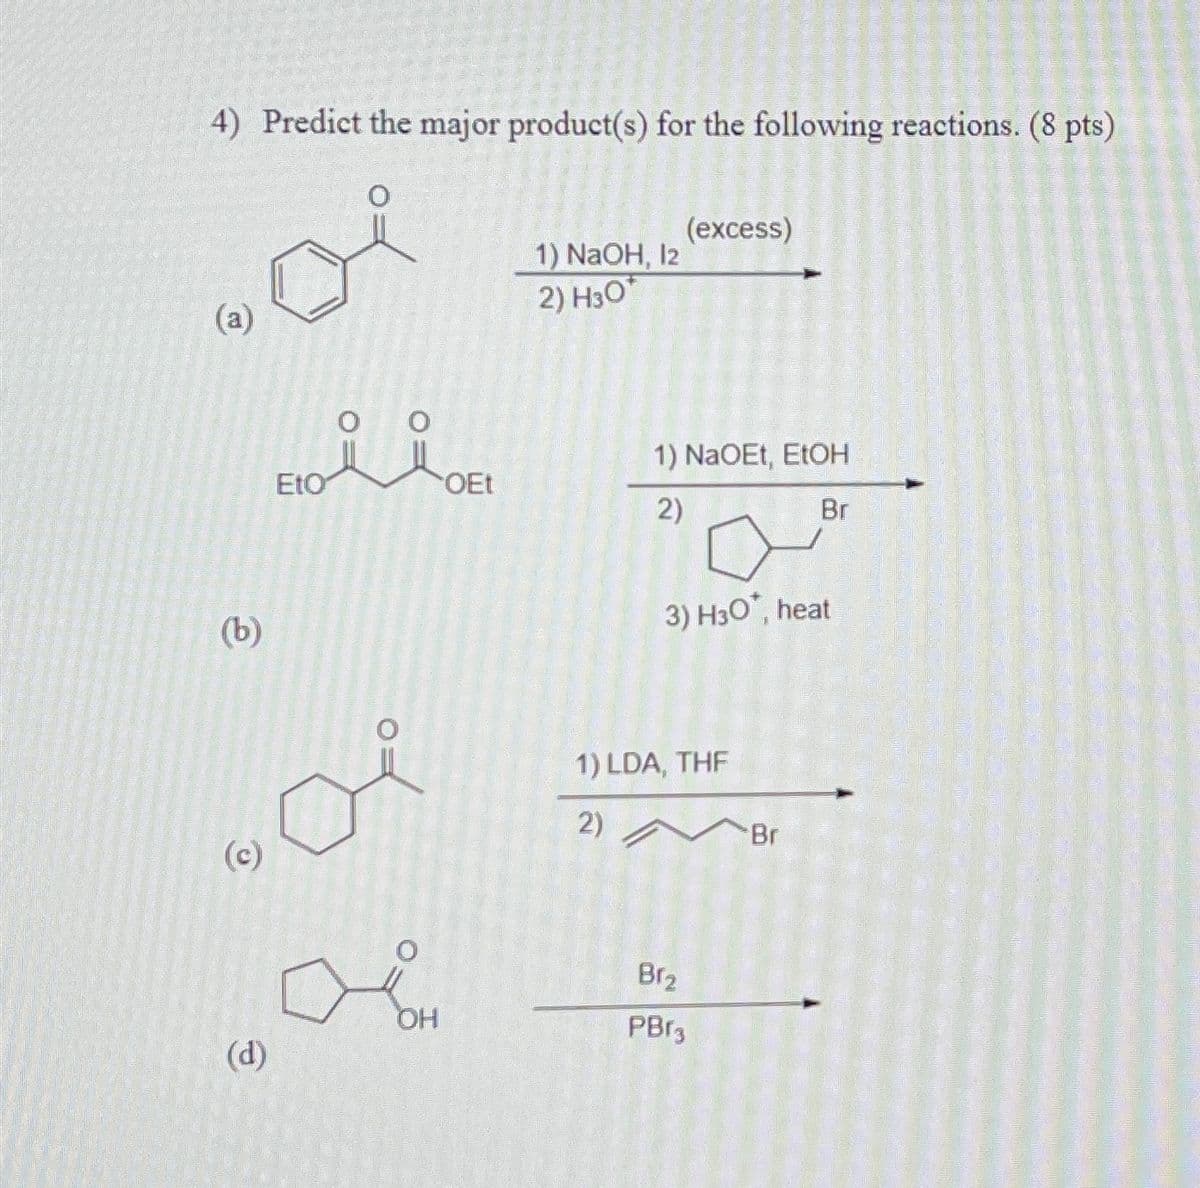 4) Predict the major product(s) for the following reactions. (8 pts)
(a)
1) NaOH, 12
2) H3O
(b)
EtO
(excess)
1) NaOEt, EtOH
OEt
2)
3) H3O, heat
(c)
1) LDA, THF
2)
Br
OH
(d)
Br₂
PBr3
Br